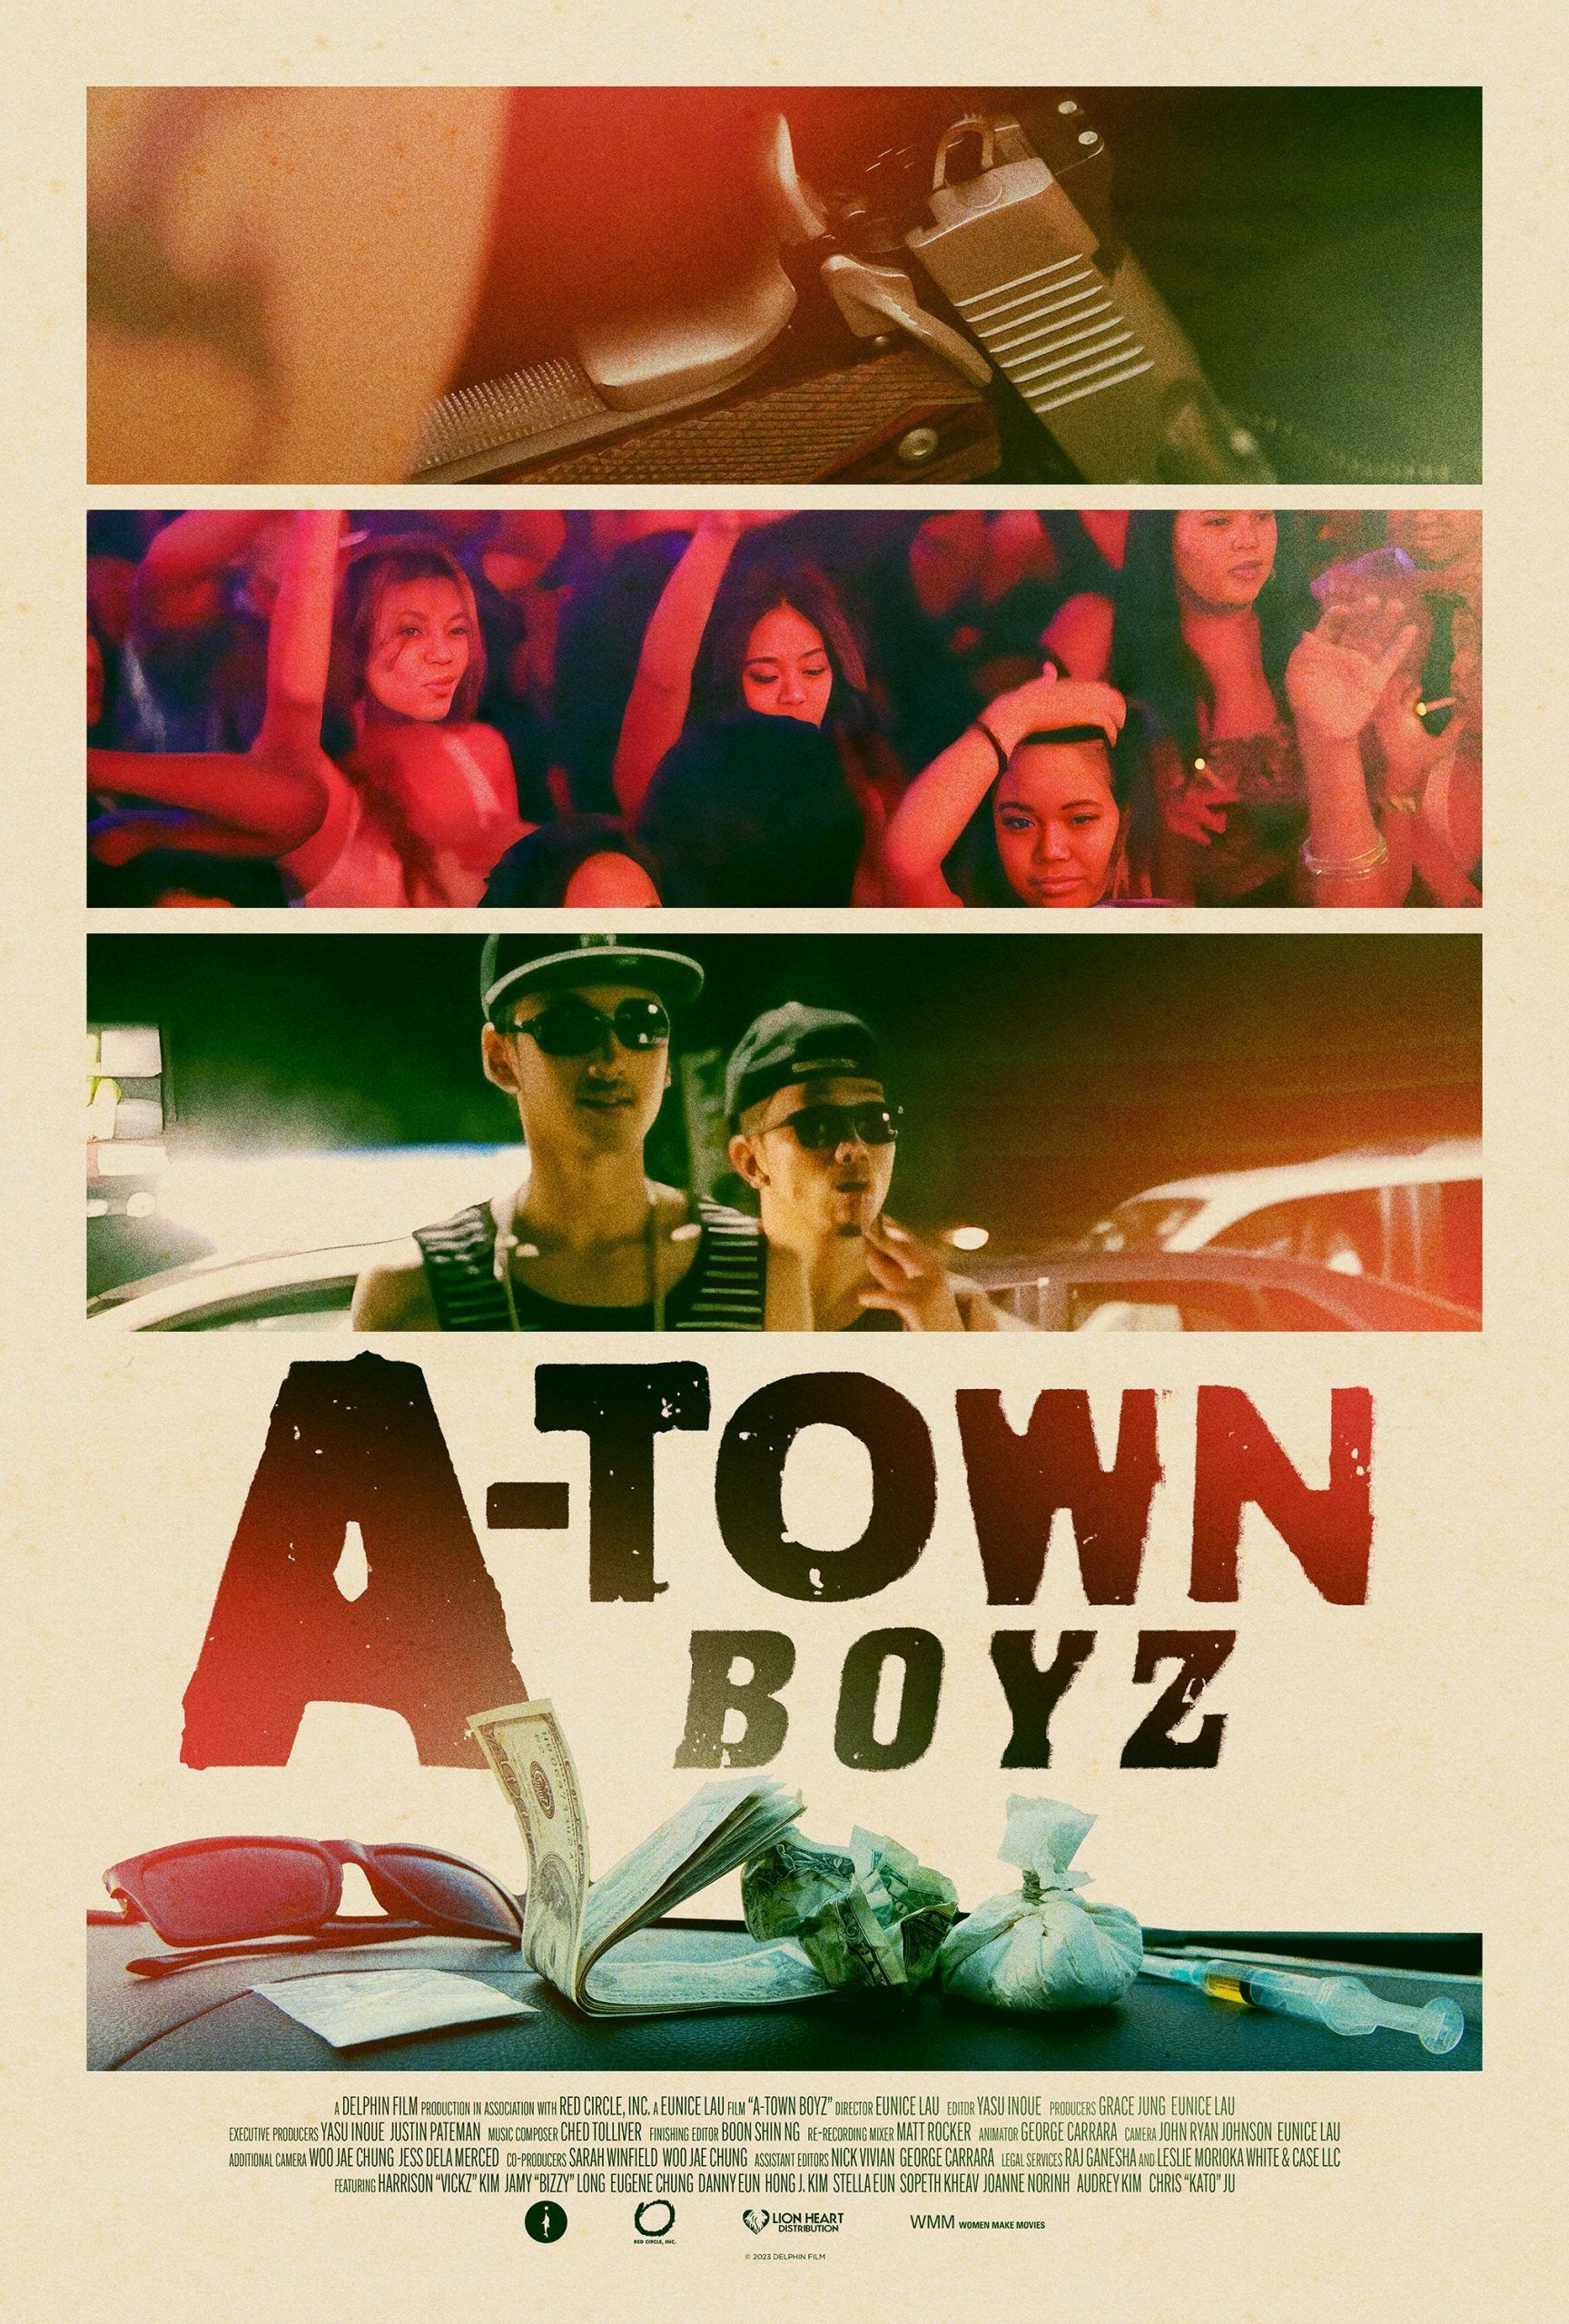 They Were Made to Choose Sides: On Eunice Lau’s “A-Town Boyz”